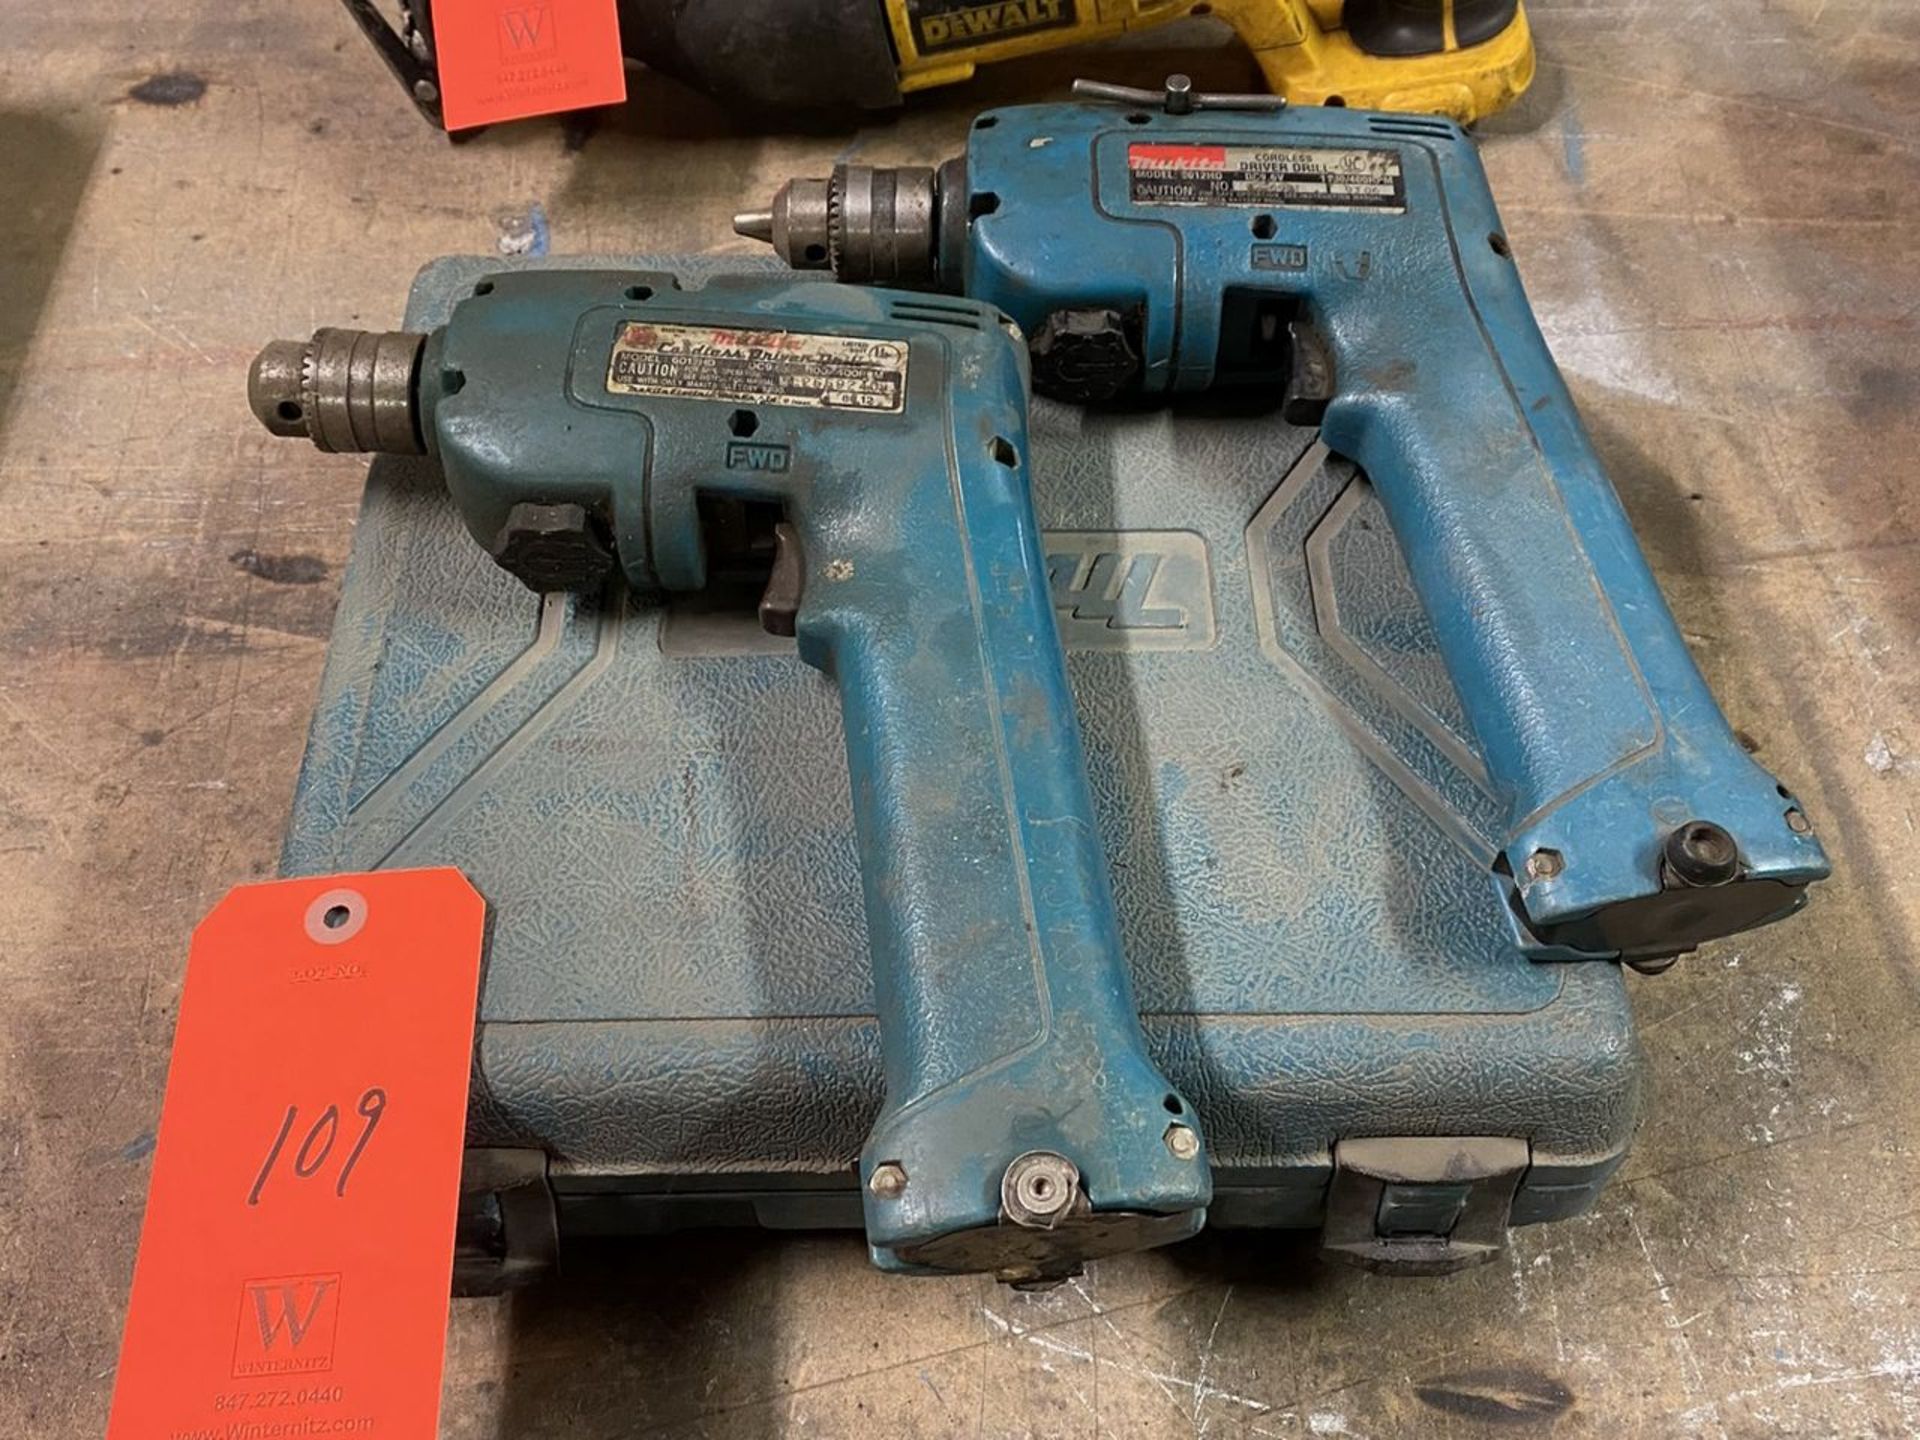 Lot - (2) Makita 3/8 in. Model 6012HD Cordless Driver Drills; 1,100/400 RPM, with Carrying Case